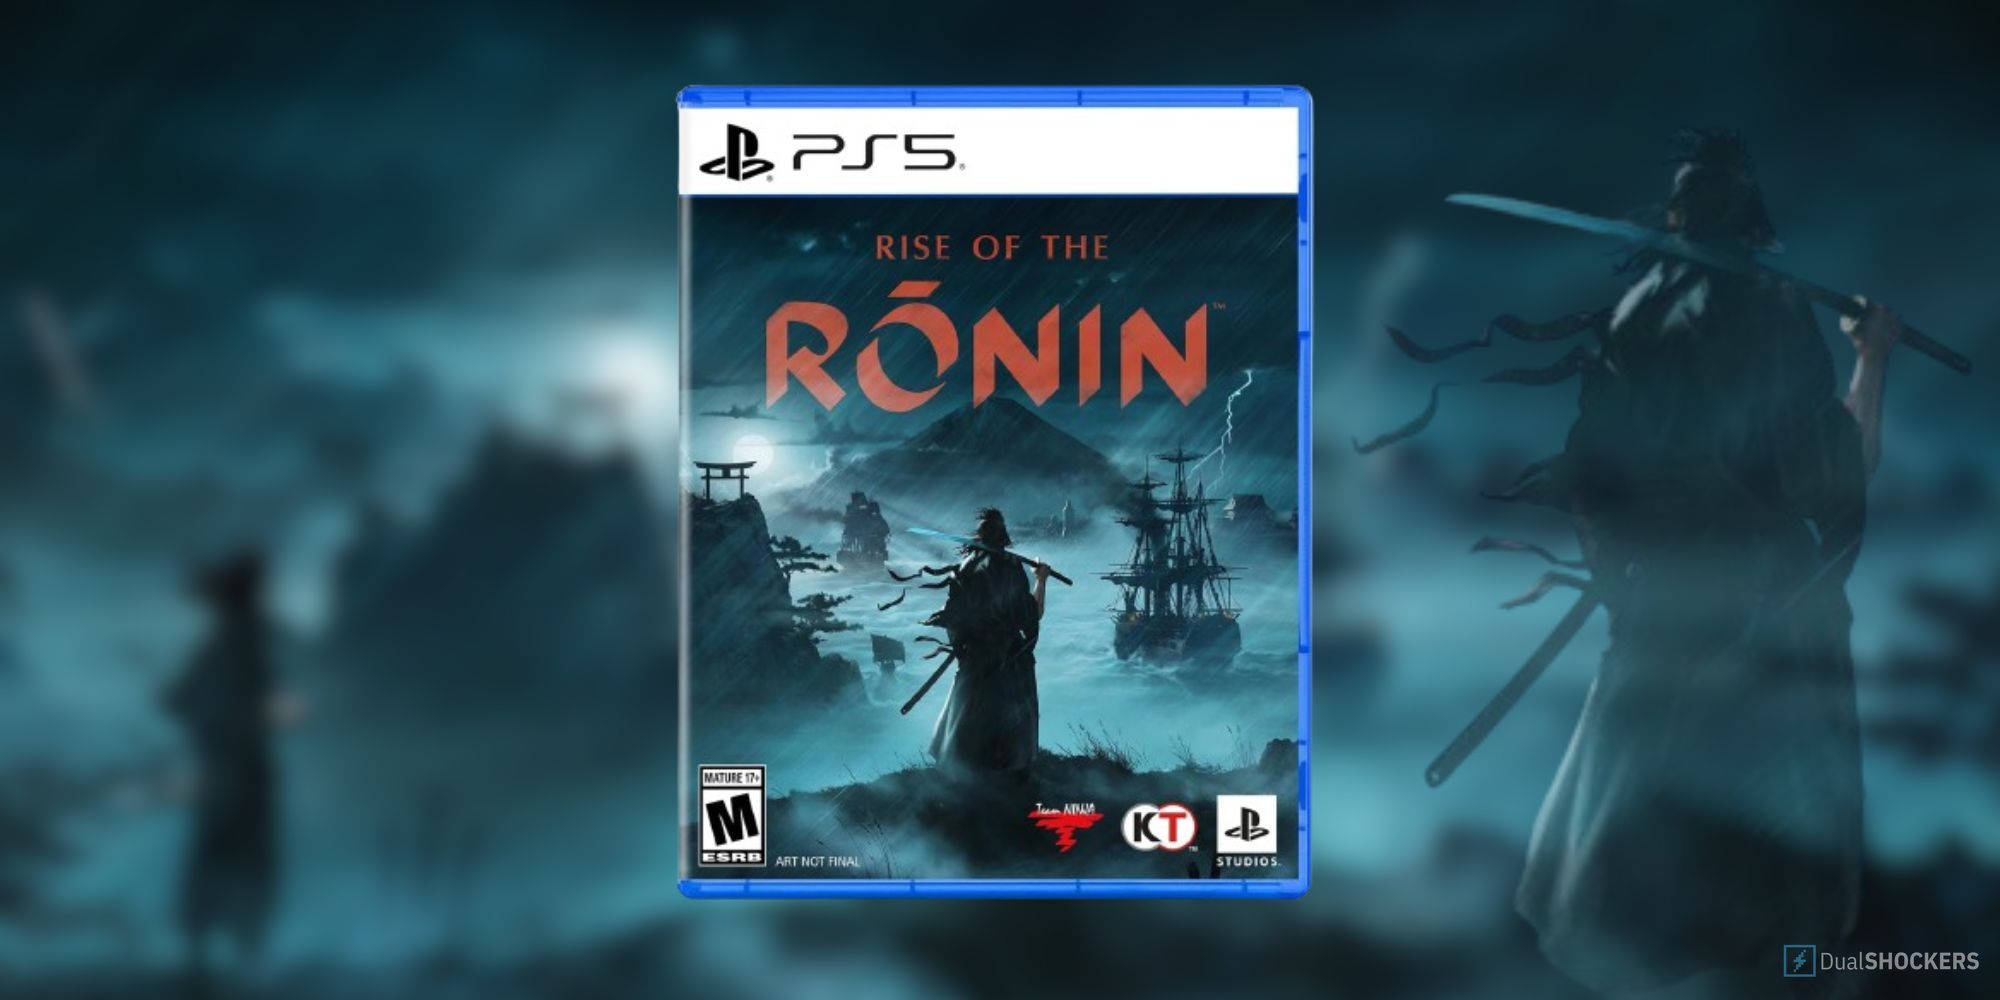 Rise Of The Ronin Pre-Order Has Three Exclusive Bonuses Up For Grabs